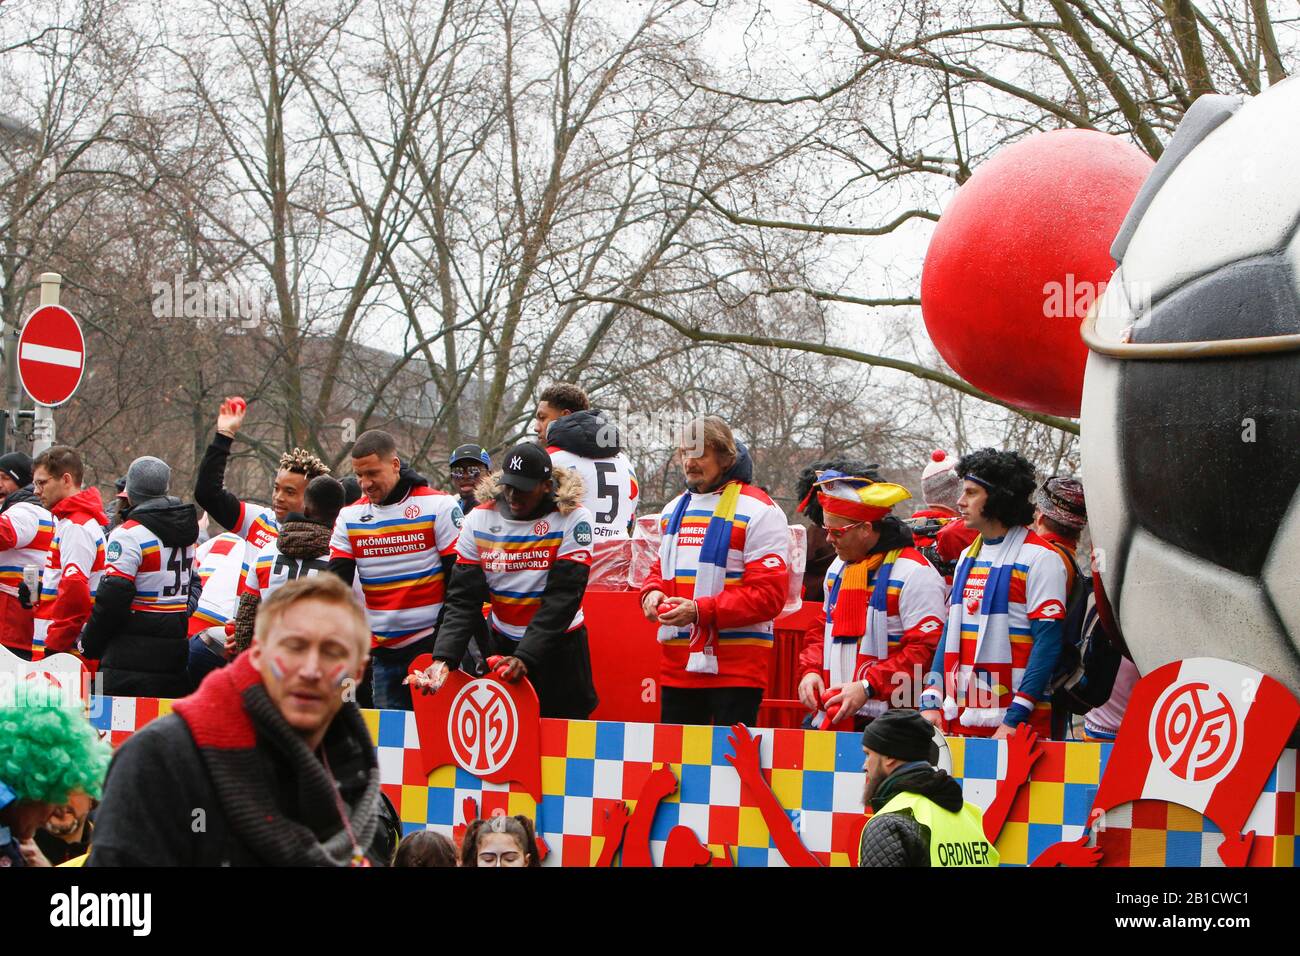 Mainz, Germany. 24th February 2020. Members of the first team of the local Bundesliga football club 1. FSV Mainz 05 ride on a float in the parade. Around half a million people lined the streets of Mainz for the traditional Rose Monday Carnival Parade. The 9 km long parade with over 9,000 participants is one of the three large Rose Monday Parades in Germany. Stock Photo